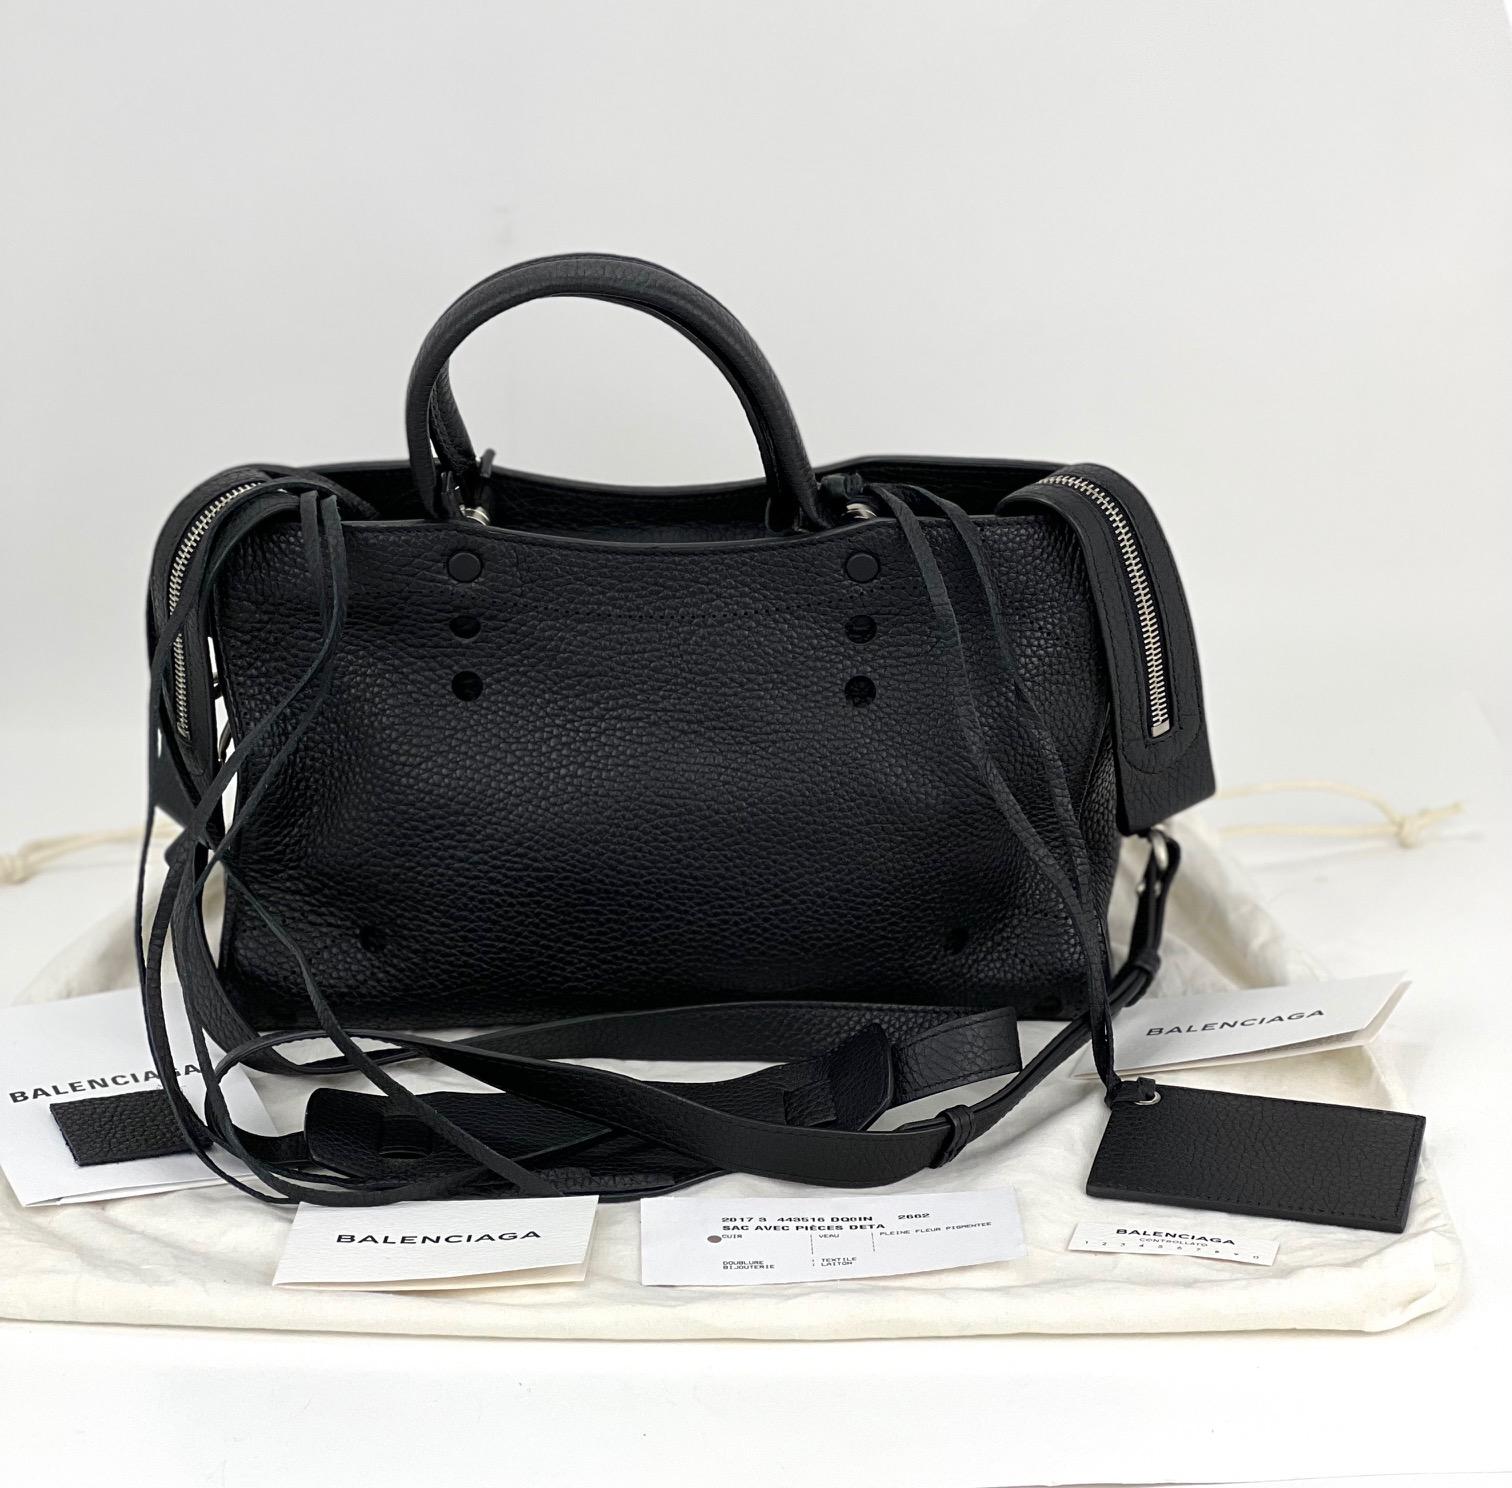 Pre-Owned  100% Authentic
BALENCIAGA Calfskin Blackout Hardware
Perforated S City Bag
RATING: A..excellent, near mint, only
slight signs of wear
MATERIAL: calfskin leather
STRAP: leather removable adjustable strap
45'' to 49'' long
DROP: 21'' to